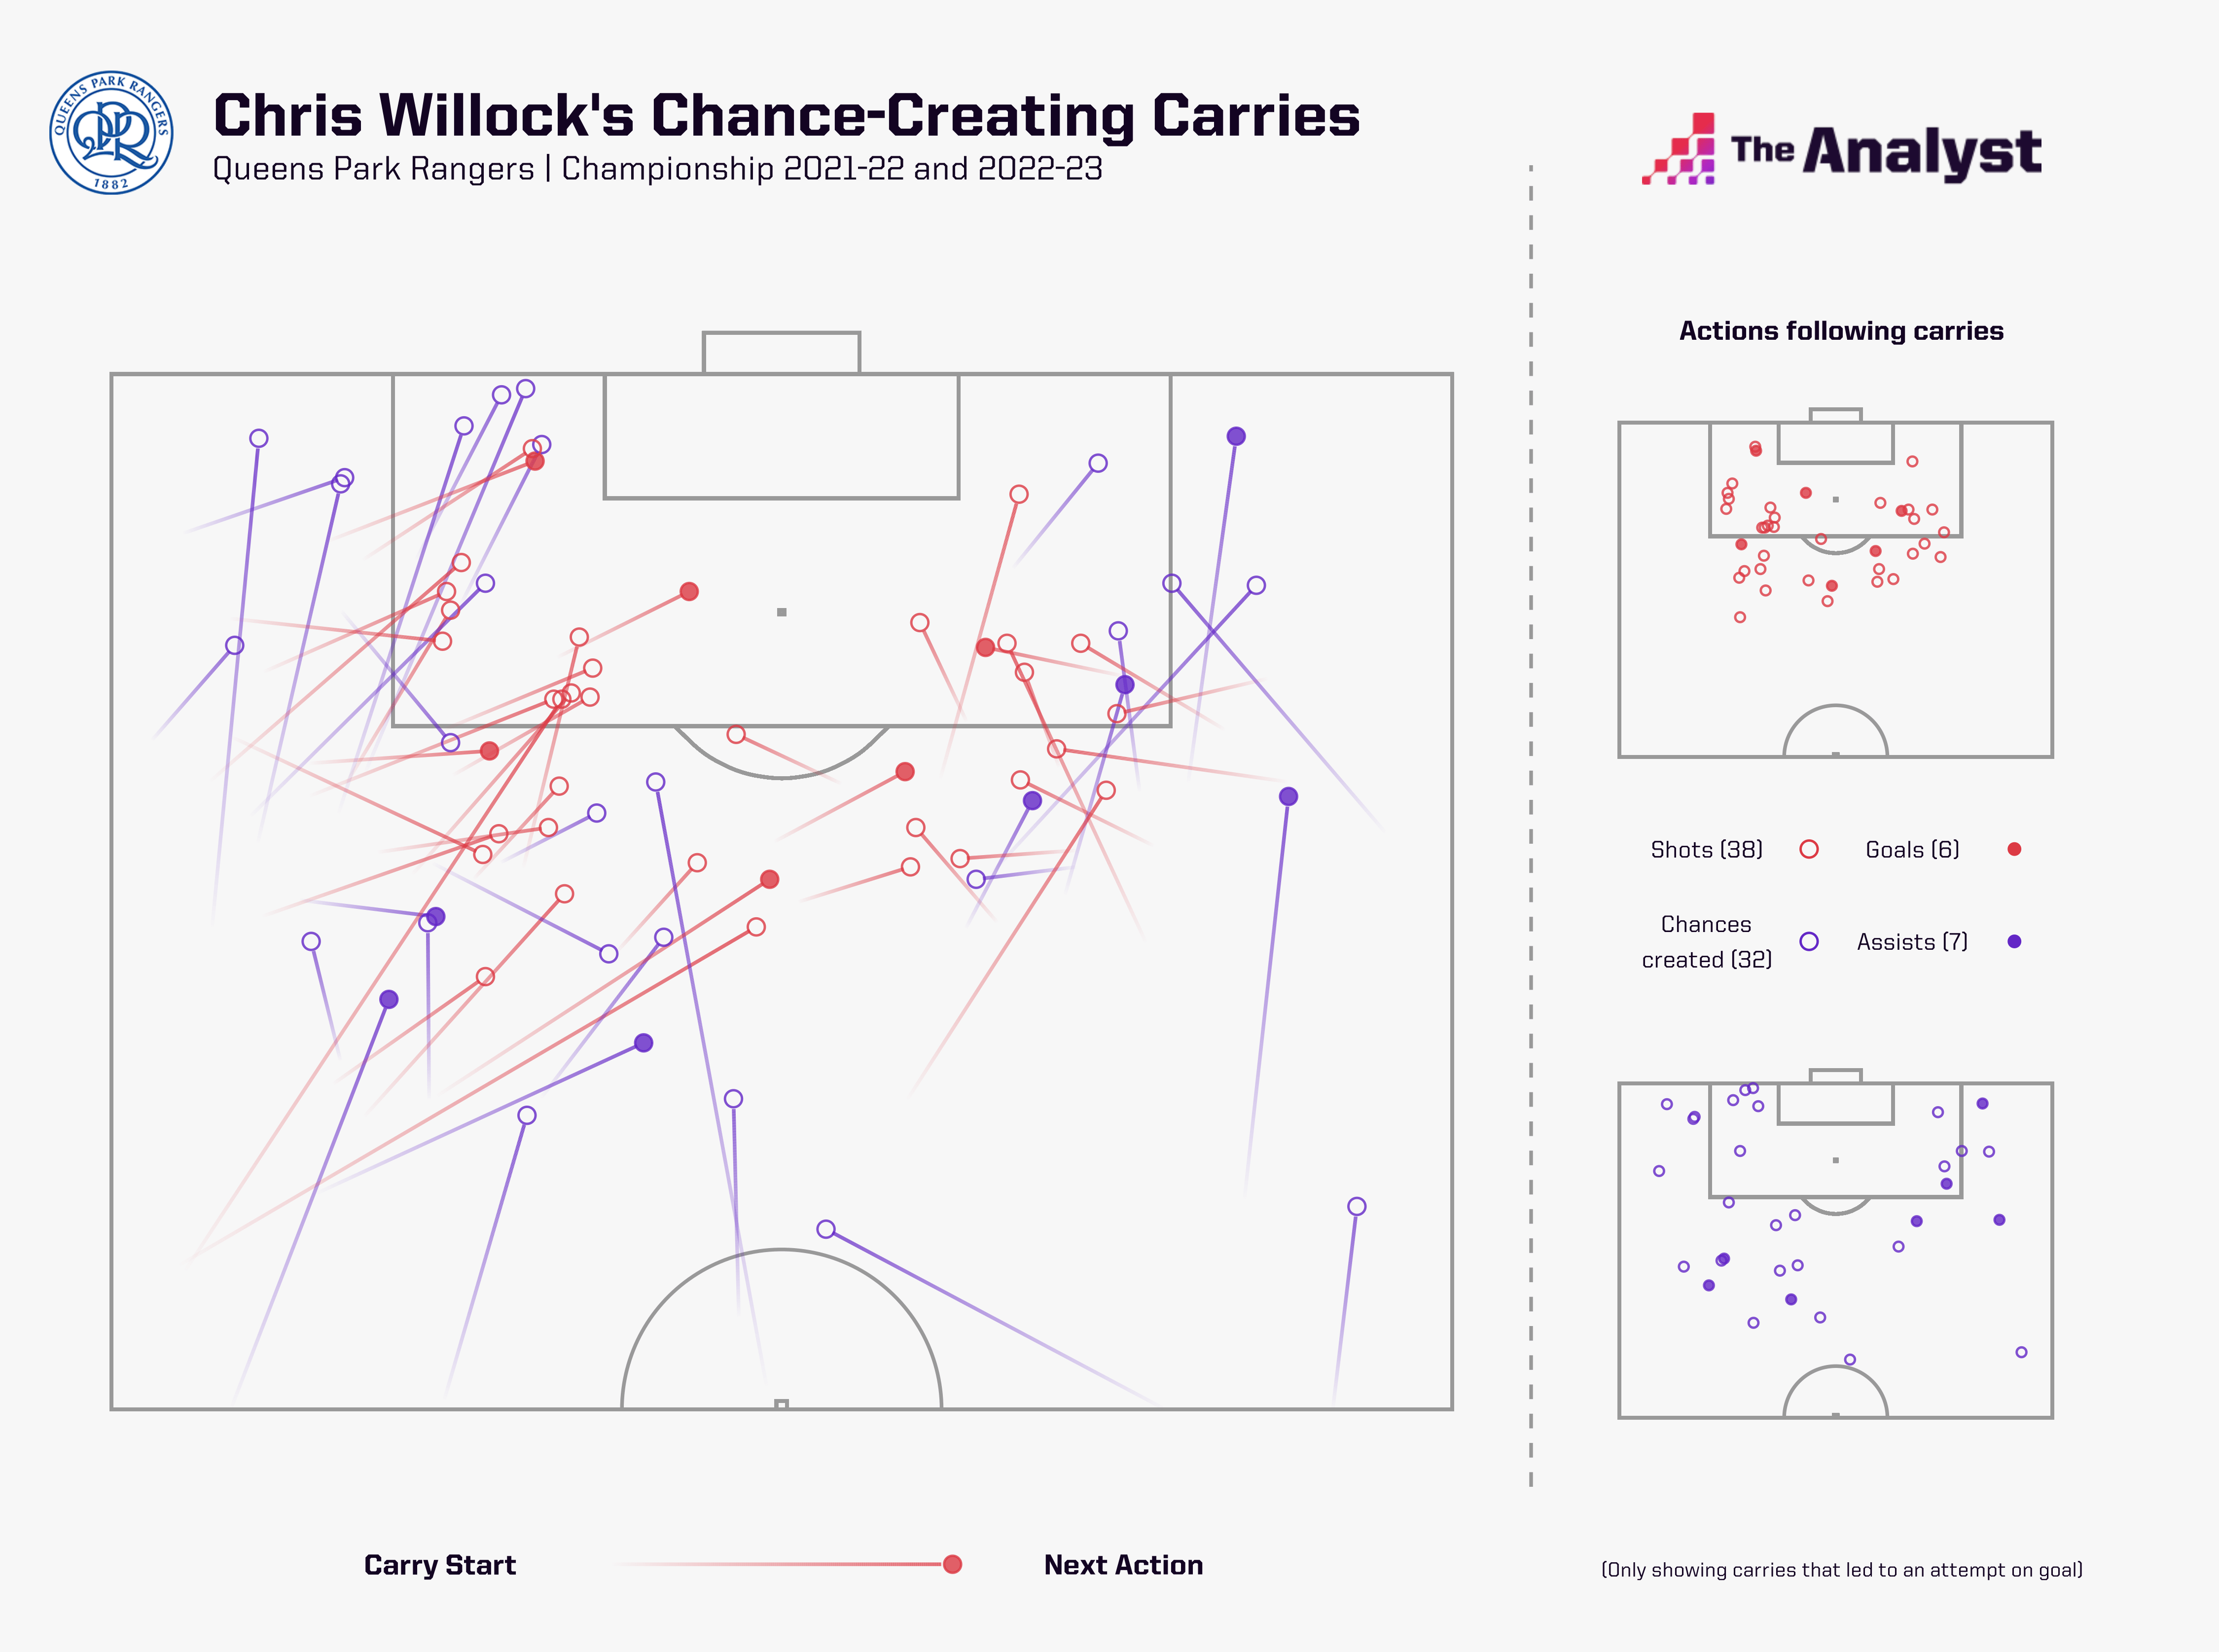 Chris Willock - Attacking Carries (since Aug 2021)